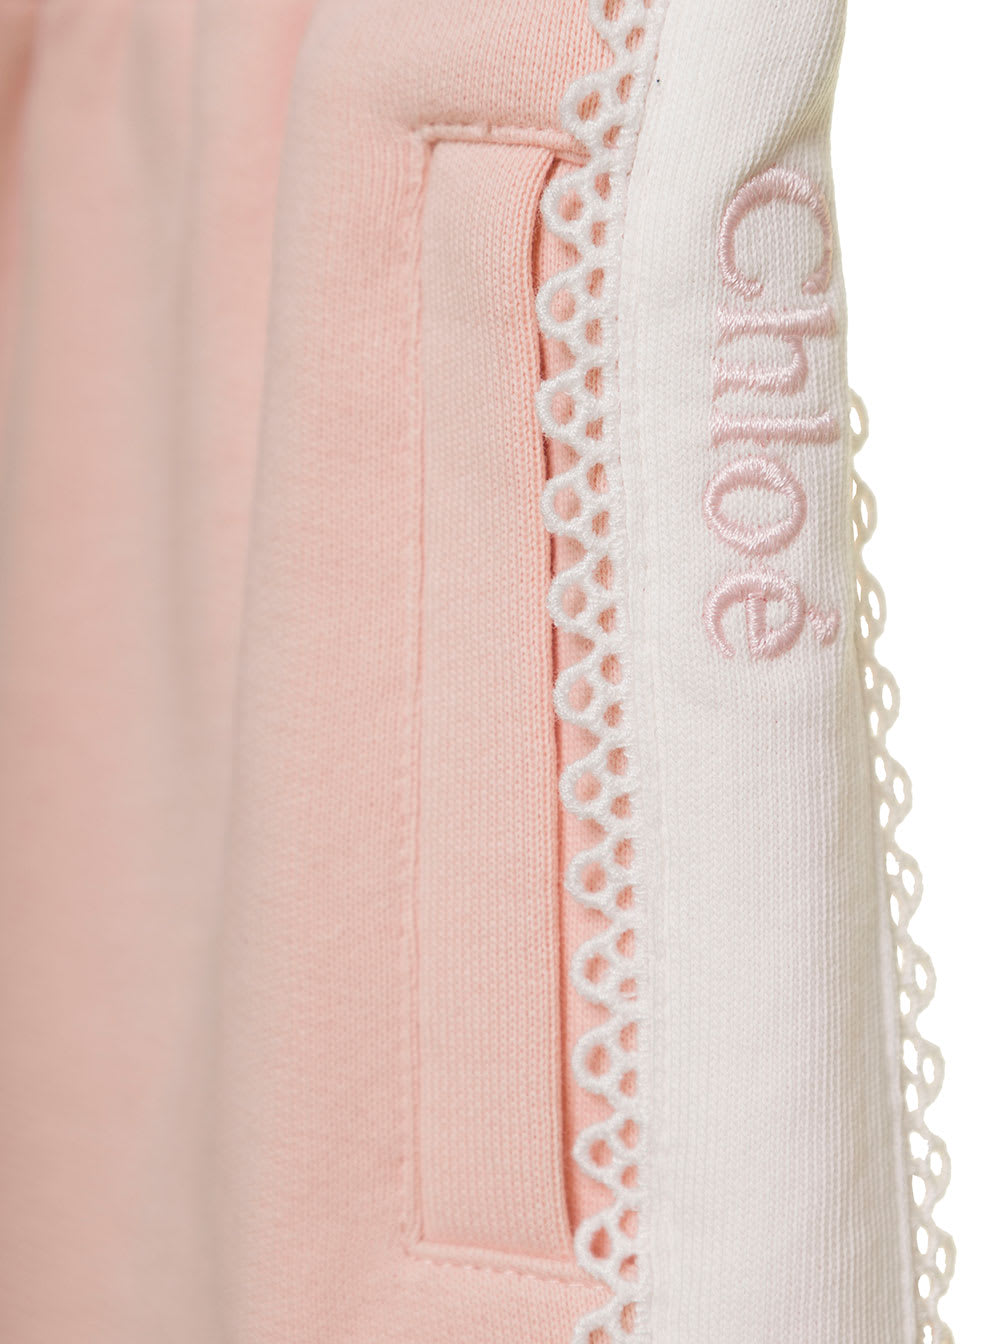 Shop Chloé Light Pink Shorts With Logo Band In Cotton Girl